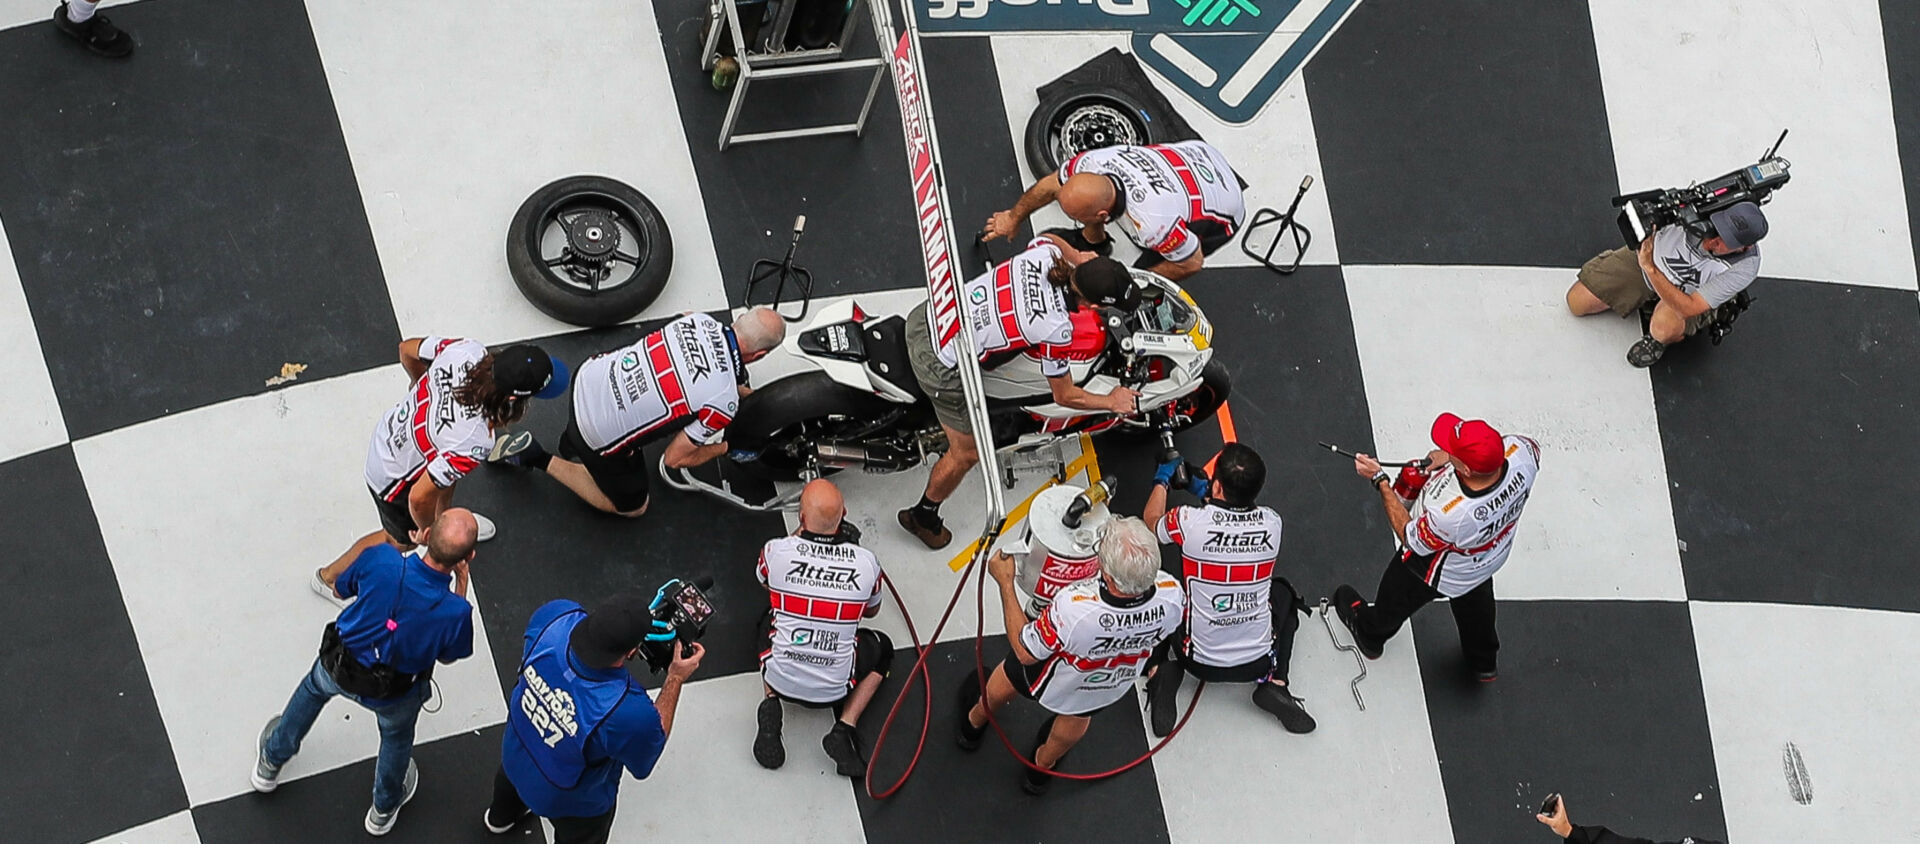 The second annual MotoAmerica Pit Stop Challenge will again take place in Daytona International Speedway's Victory Lane the day prior to the Daytona 200 Photo by Brian J. Nelson, courtesy MotoAmerica.